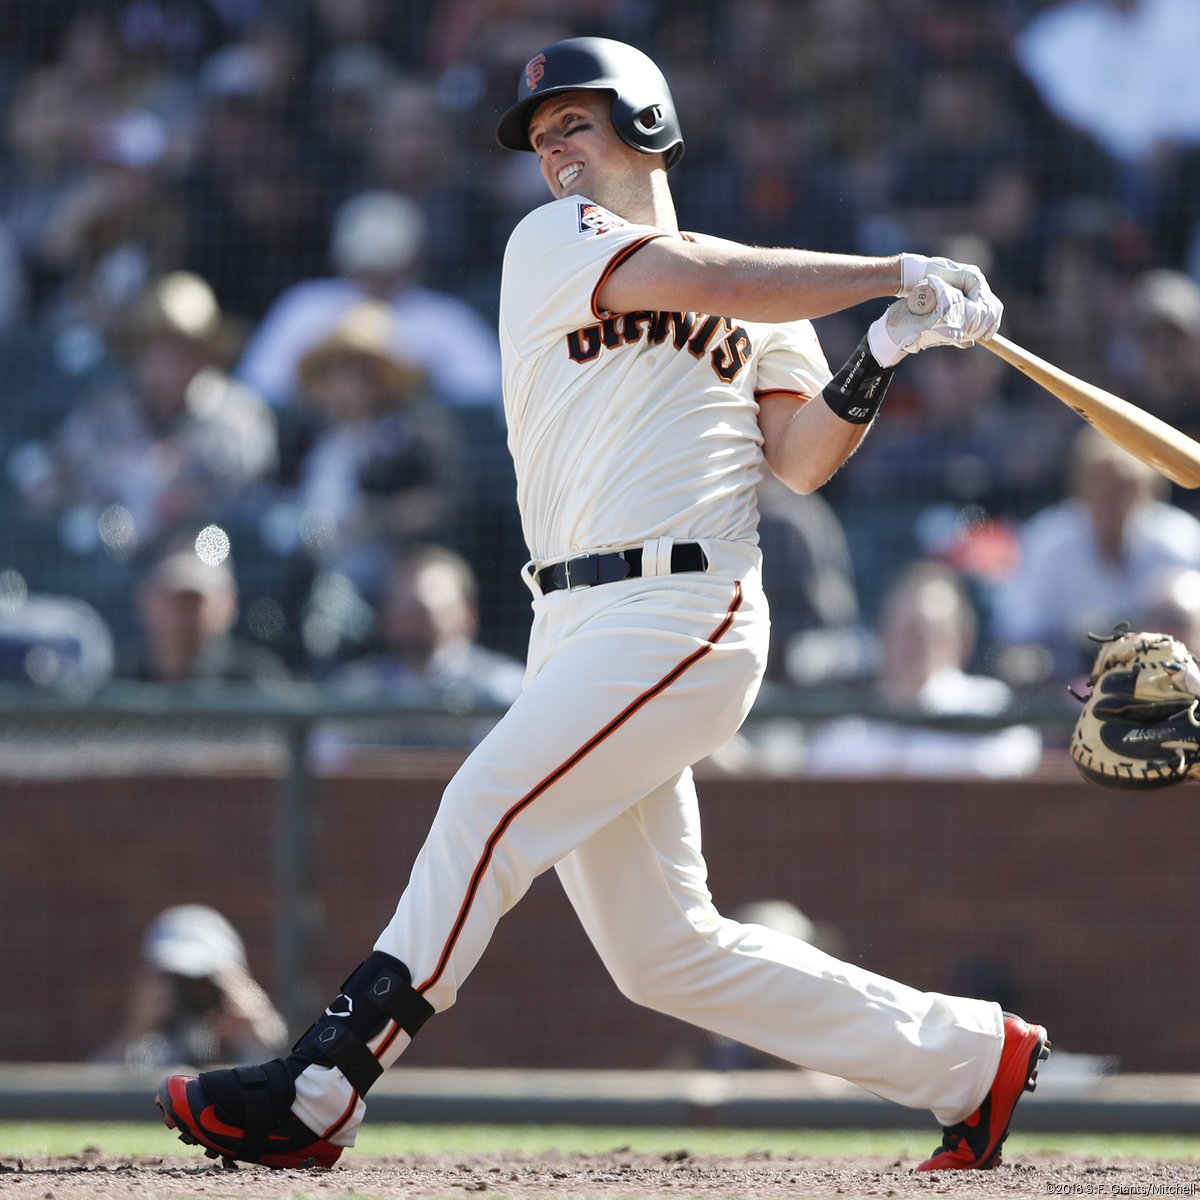 Buster Posey thrilled as he joins Giants' ownership group